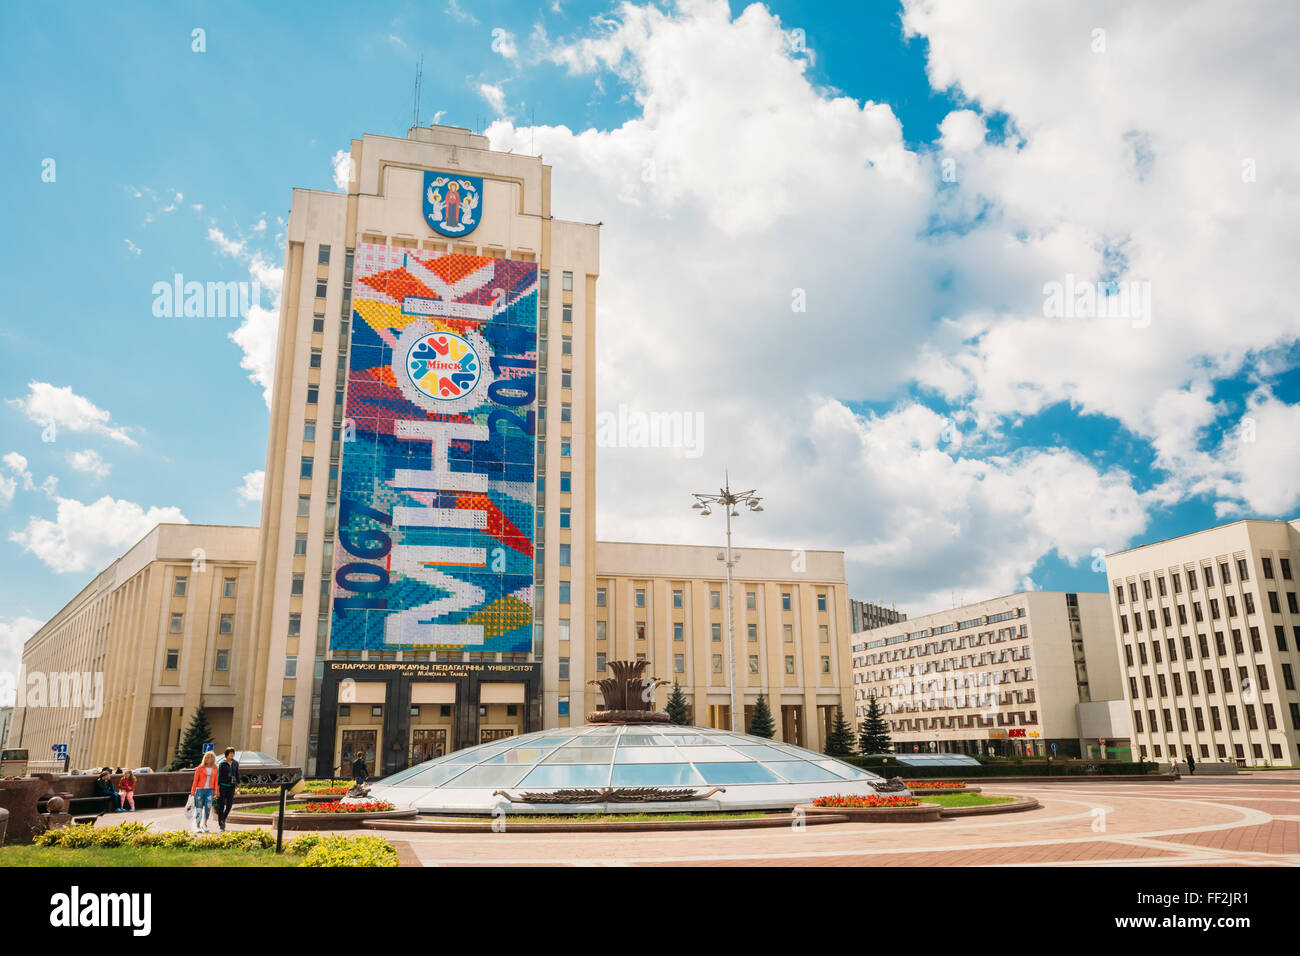 MINSK, BELARUS - AUGUST 27, 2014: The building of the Maxim Tank Belarusian State Pedagogical University. It specialises in teac Stock Photo